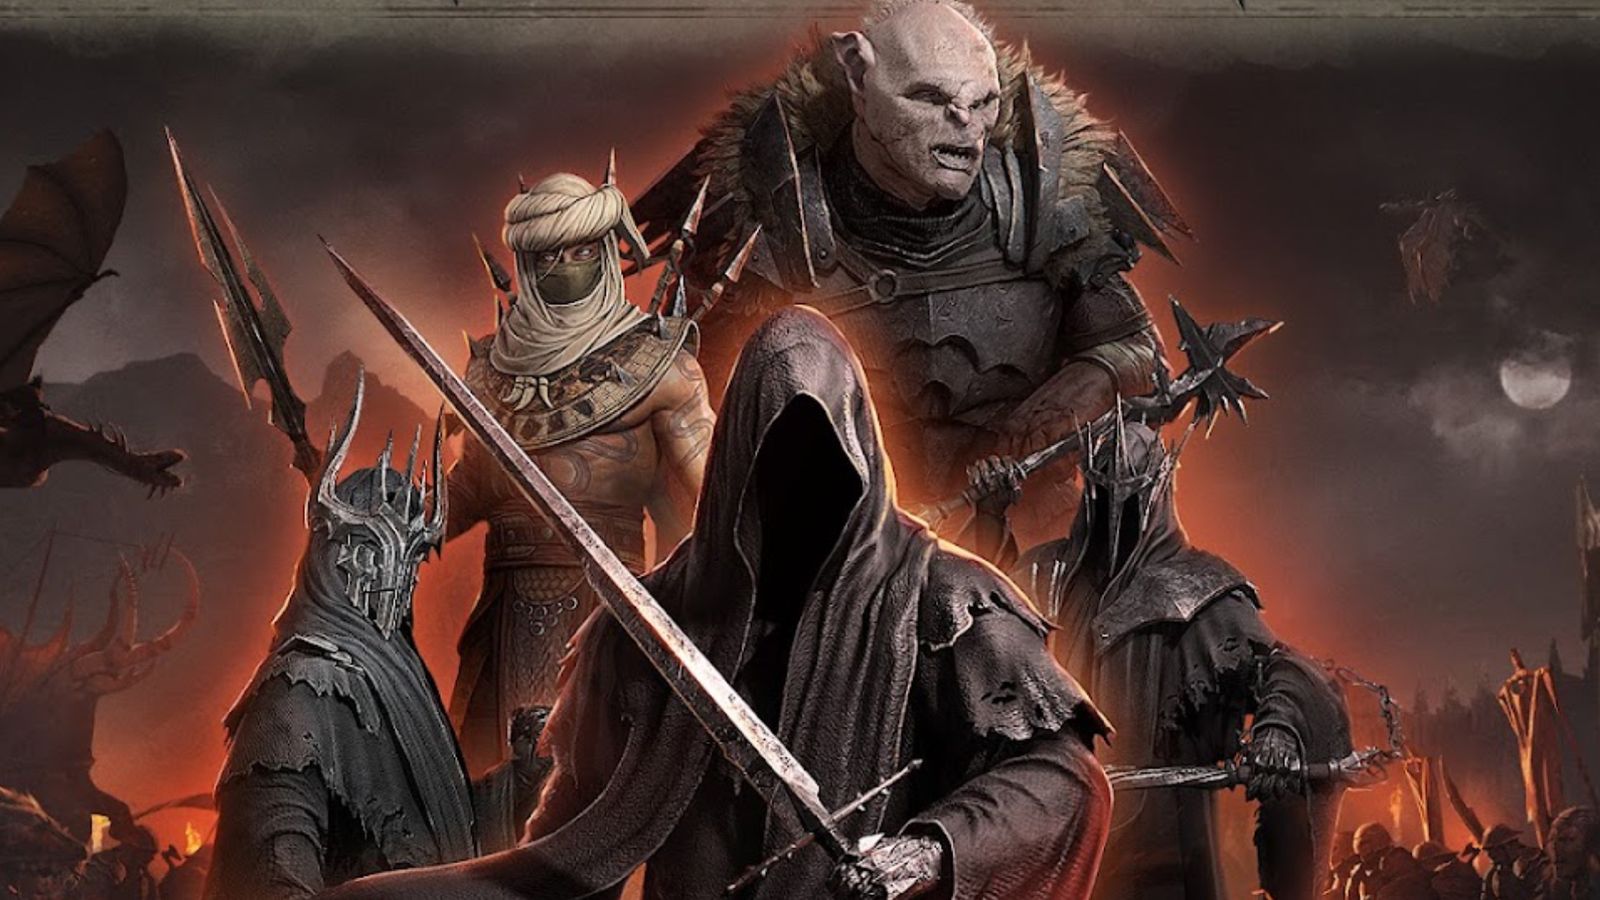 Screenshot of orcs, Sauron, and other villains in The Lord of the Rings: Rise to War